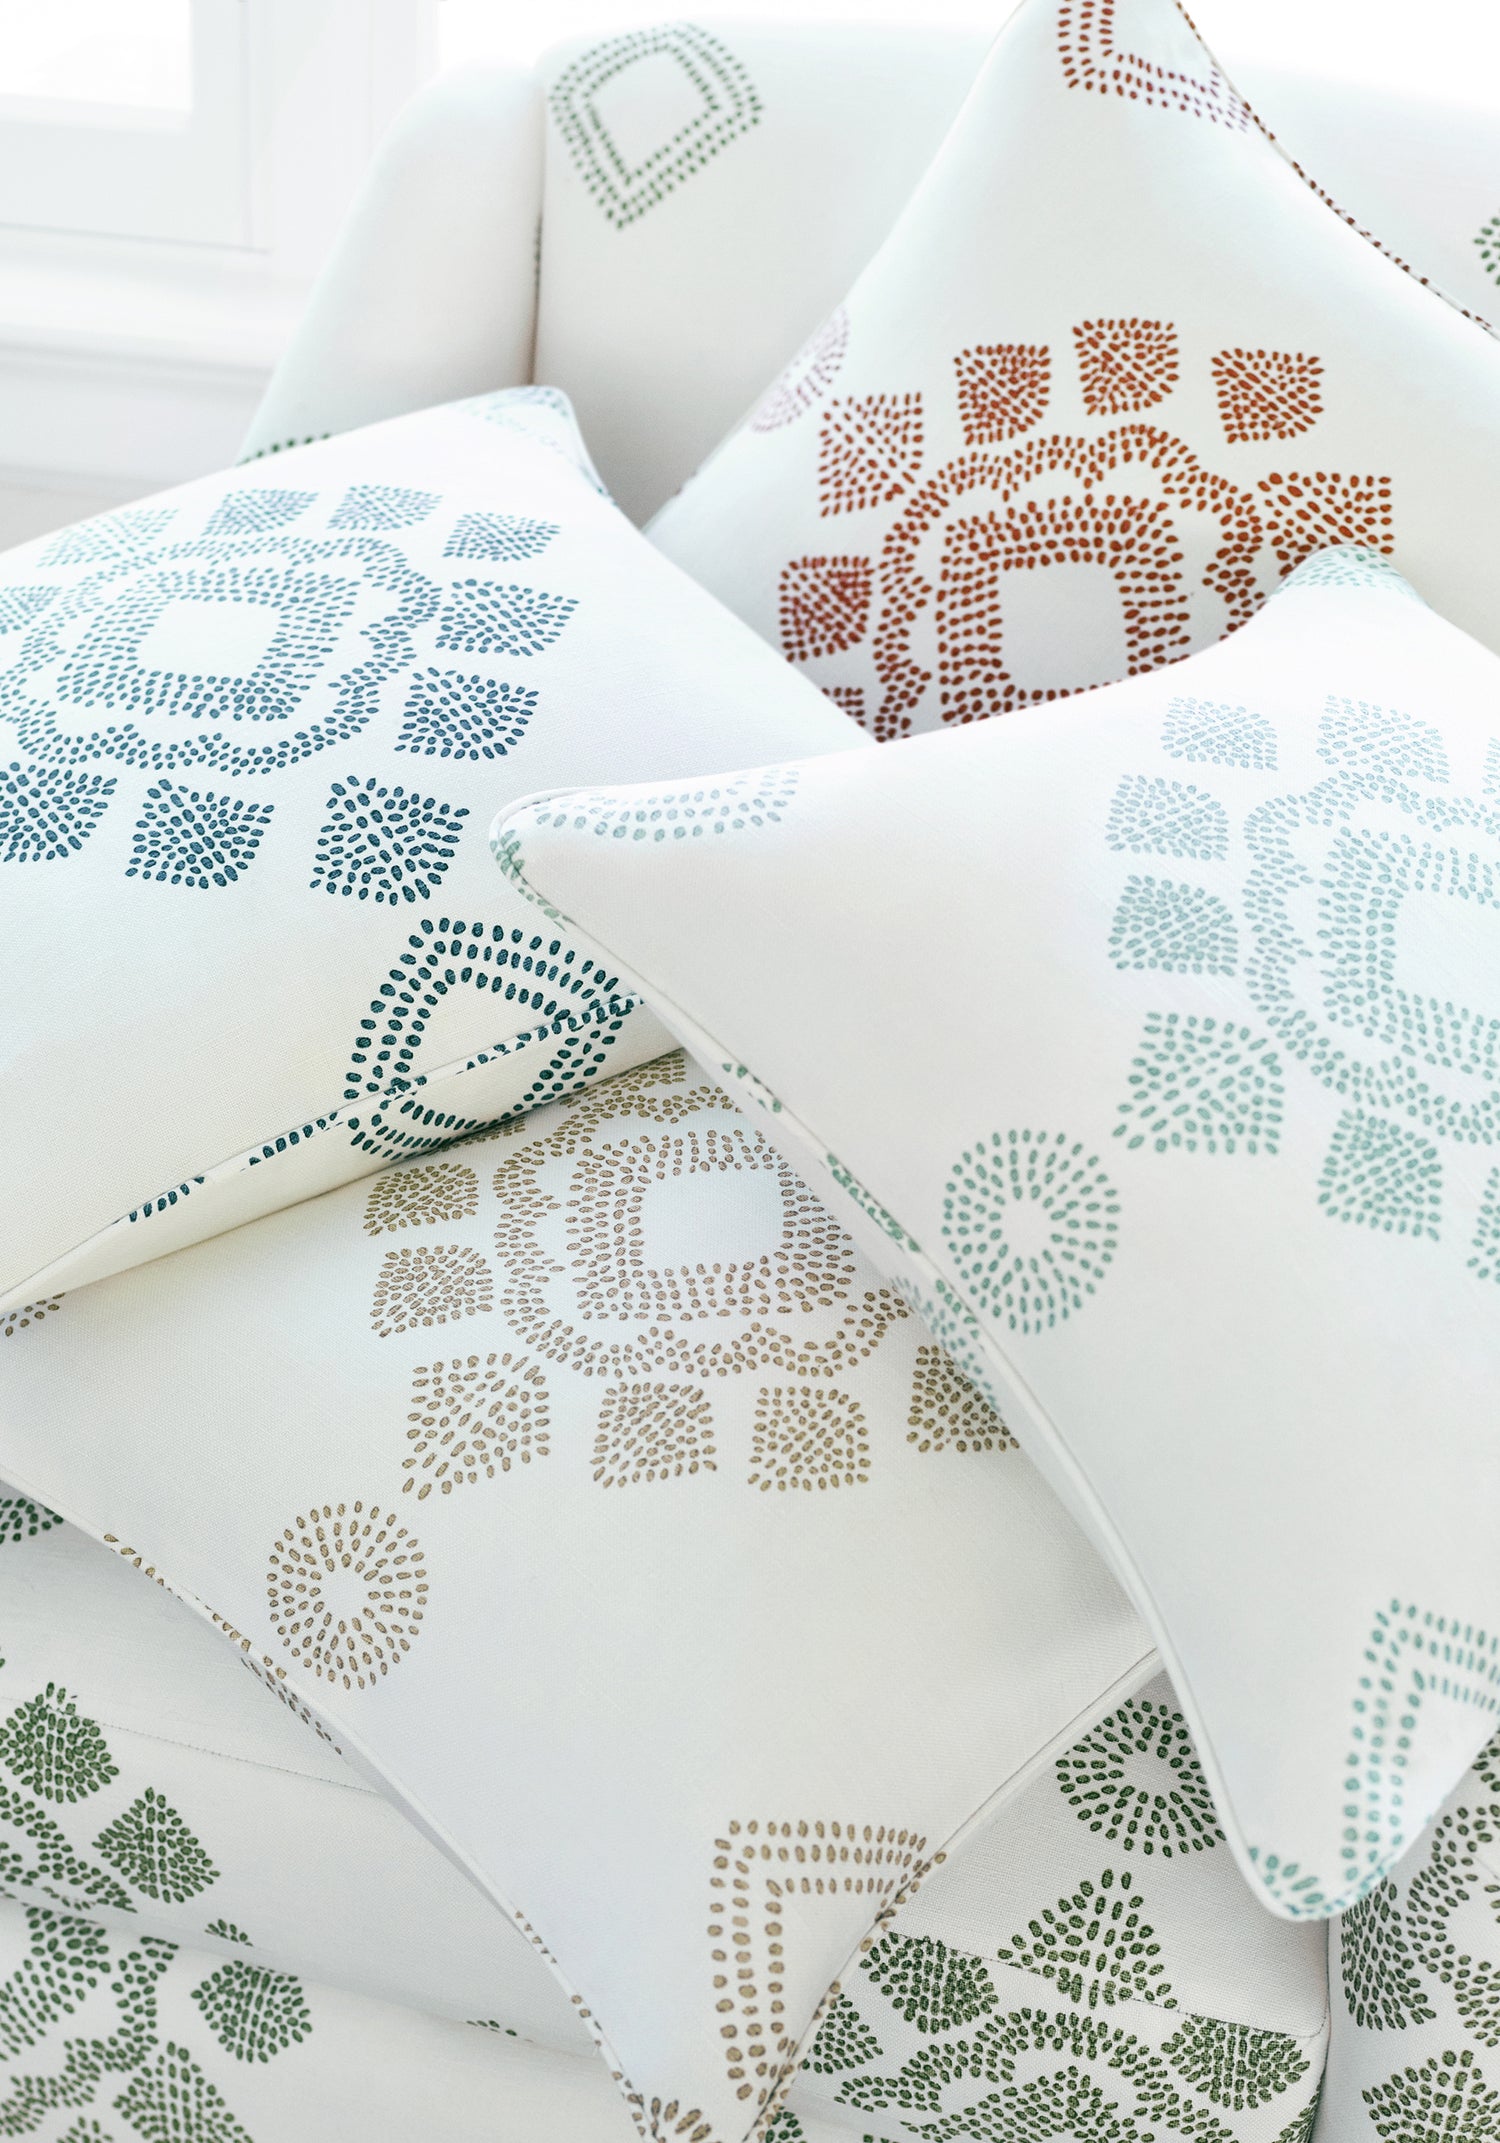 Pillows Province Medallion fabric in spruce color - pattern number F981322 - by Thibaut in the Montecito collection